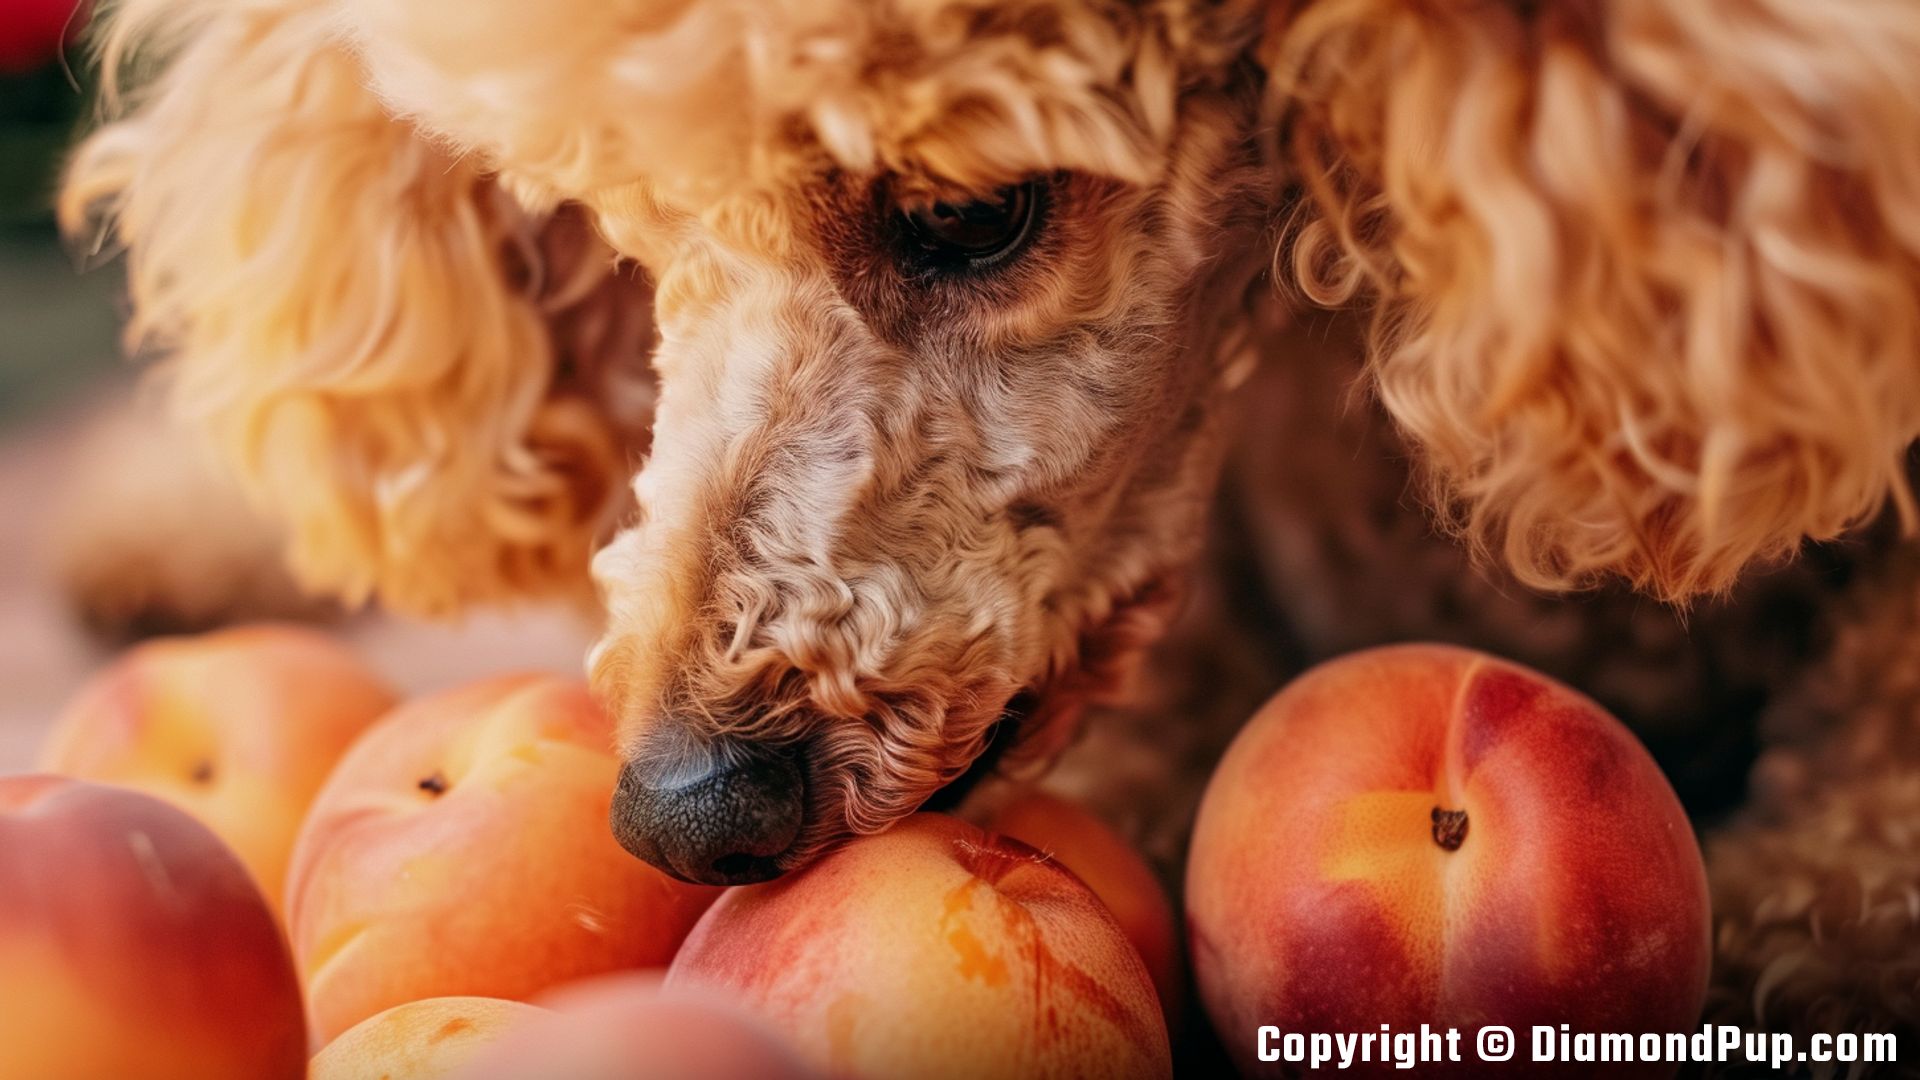 Picture of an Adorable Poodle Eating Peaches